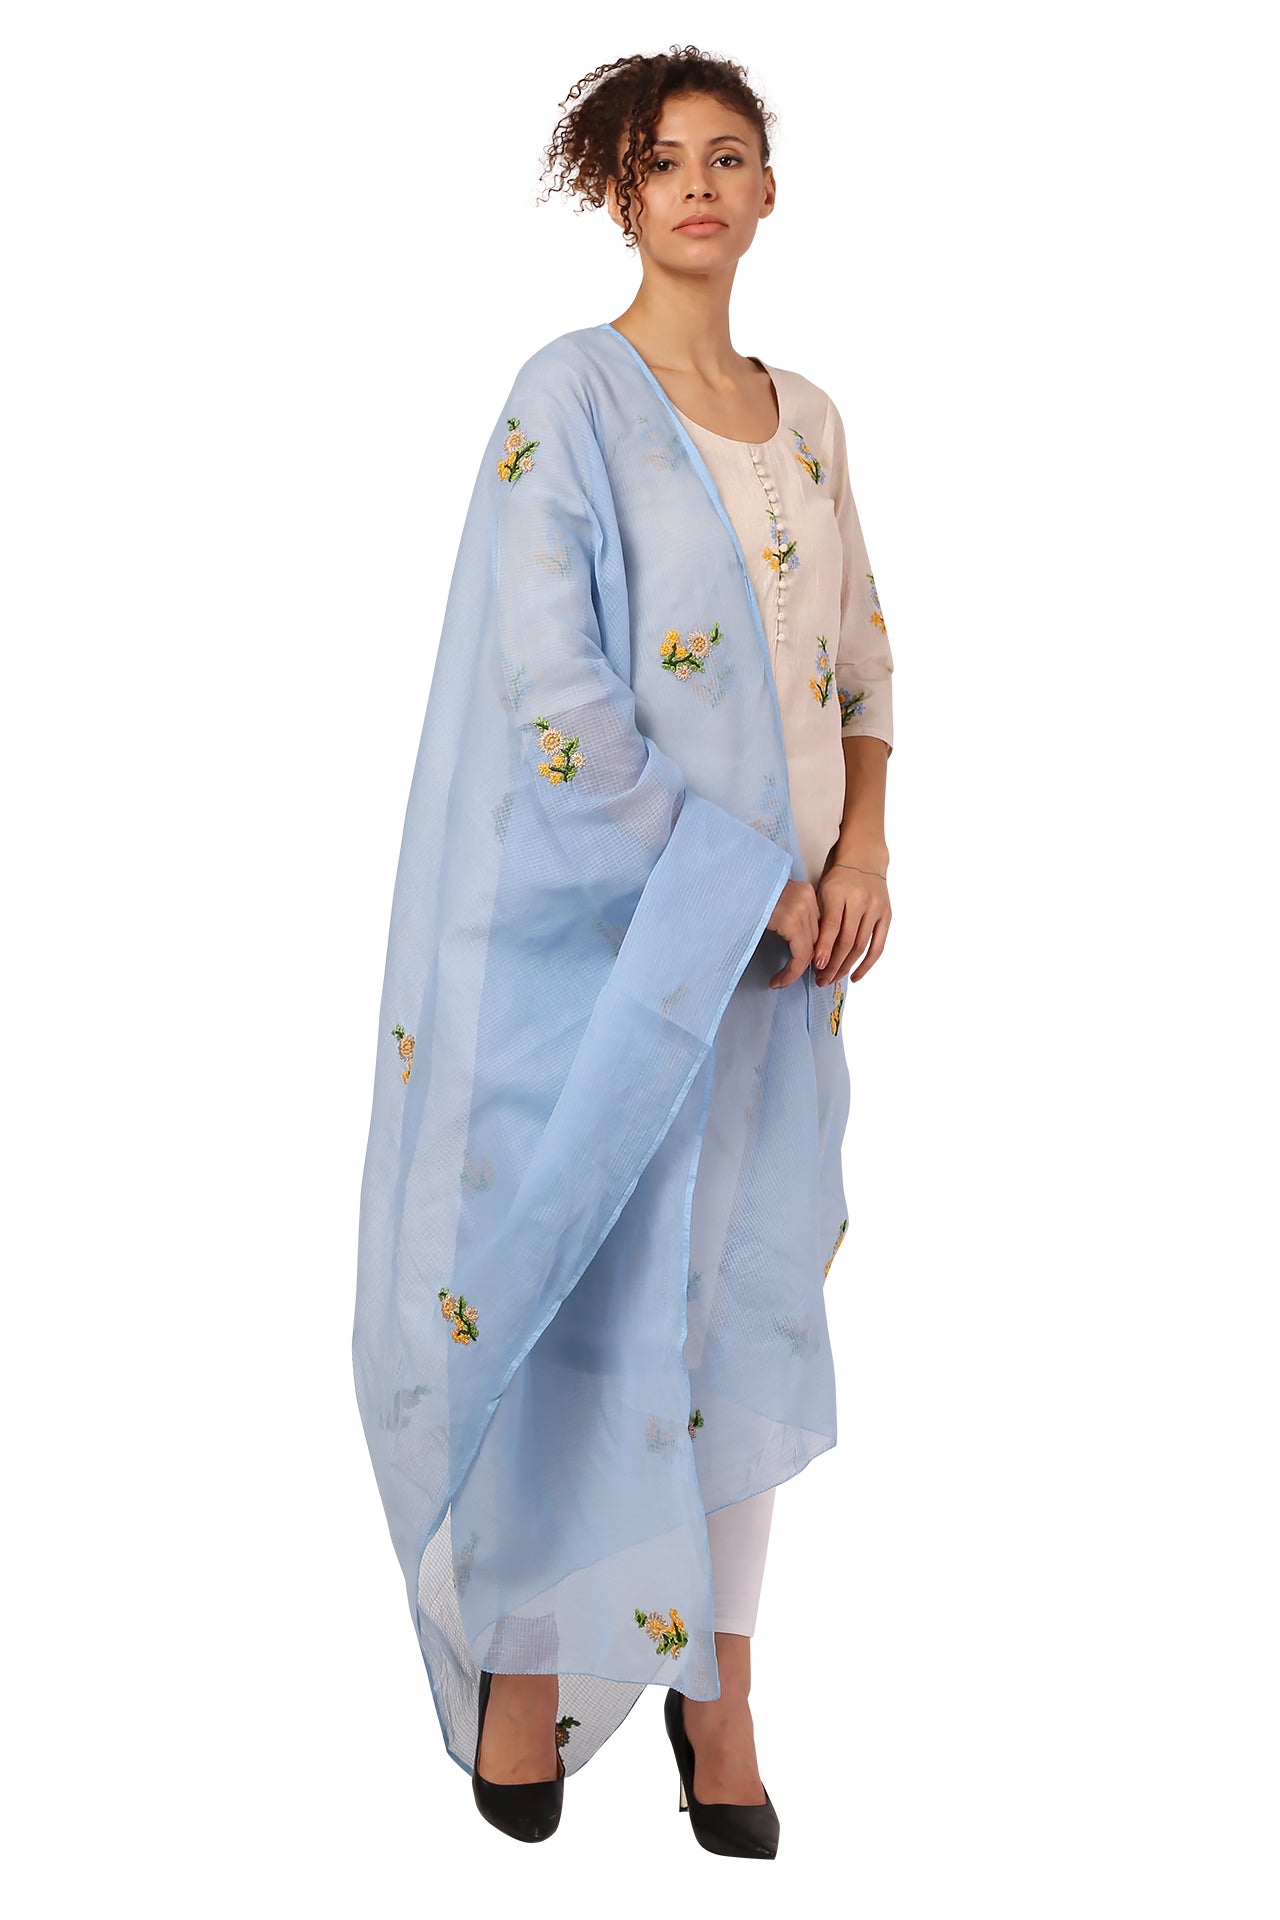 AMODINI OFF -WHITE  COTTON WITH BLUE EMBROIDERY ROUND NECK STRAIGHT FIT KURTA